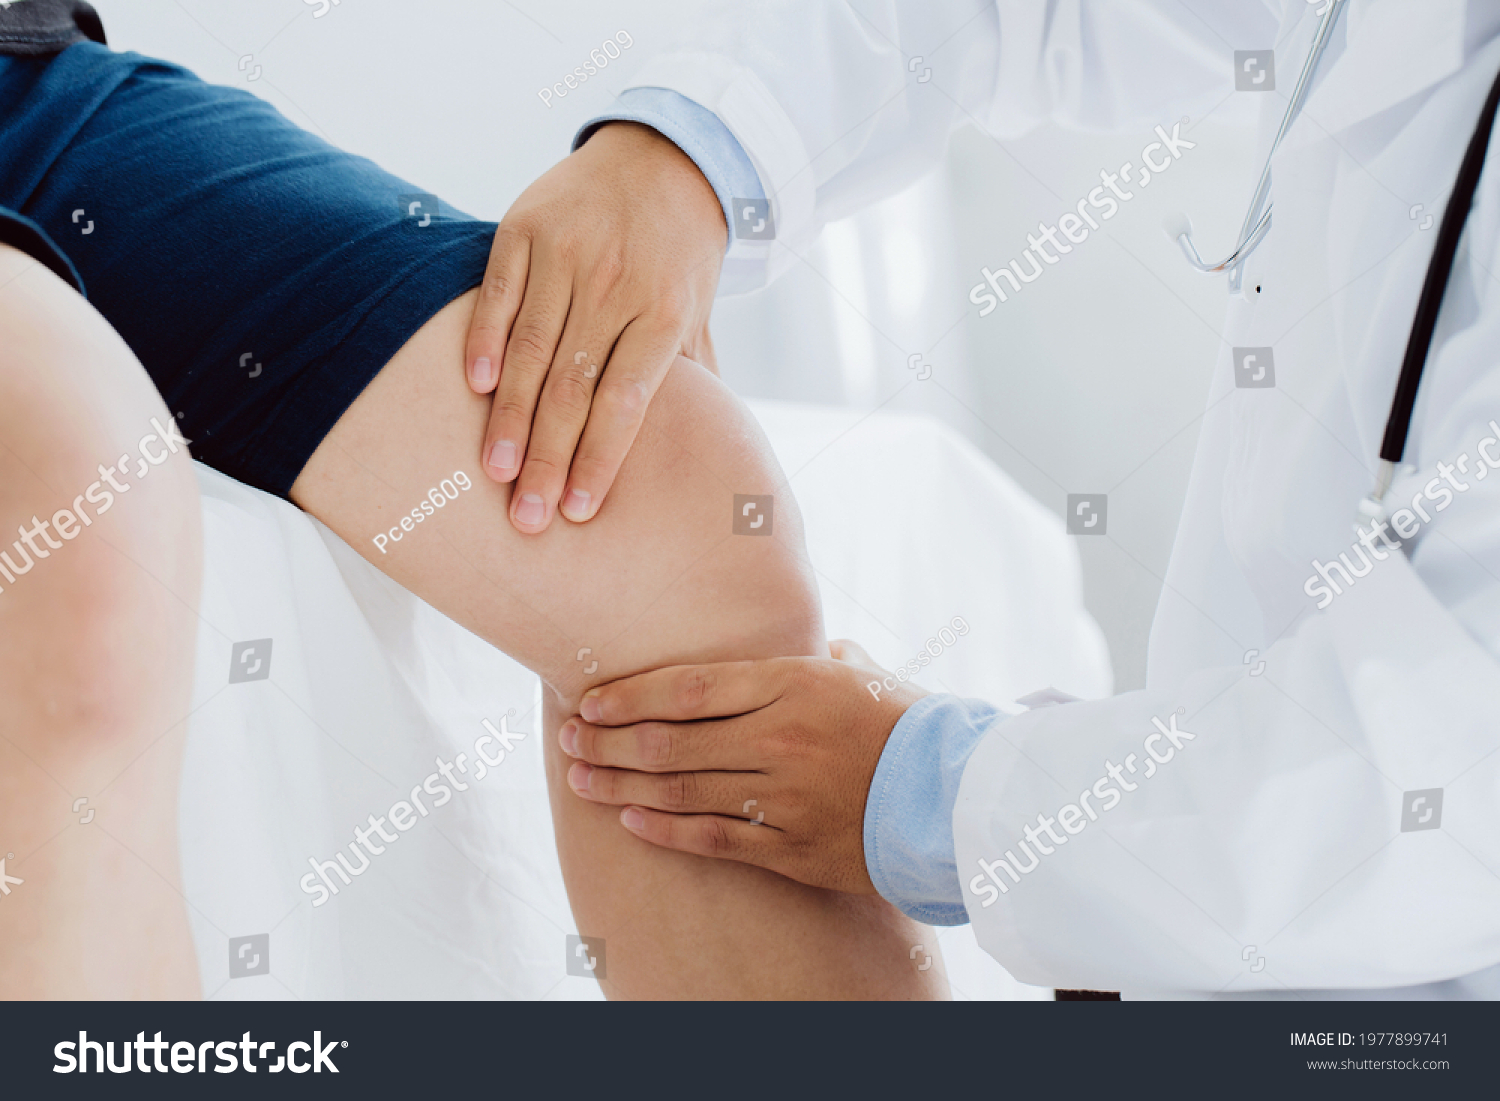 Doctor physiotherapist working examining treating injured knee of patient, his using the handle to the patient knee to check for pain. #1977899741